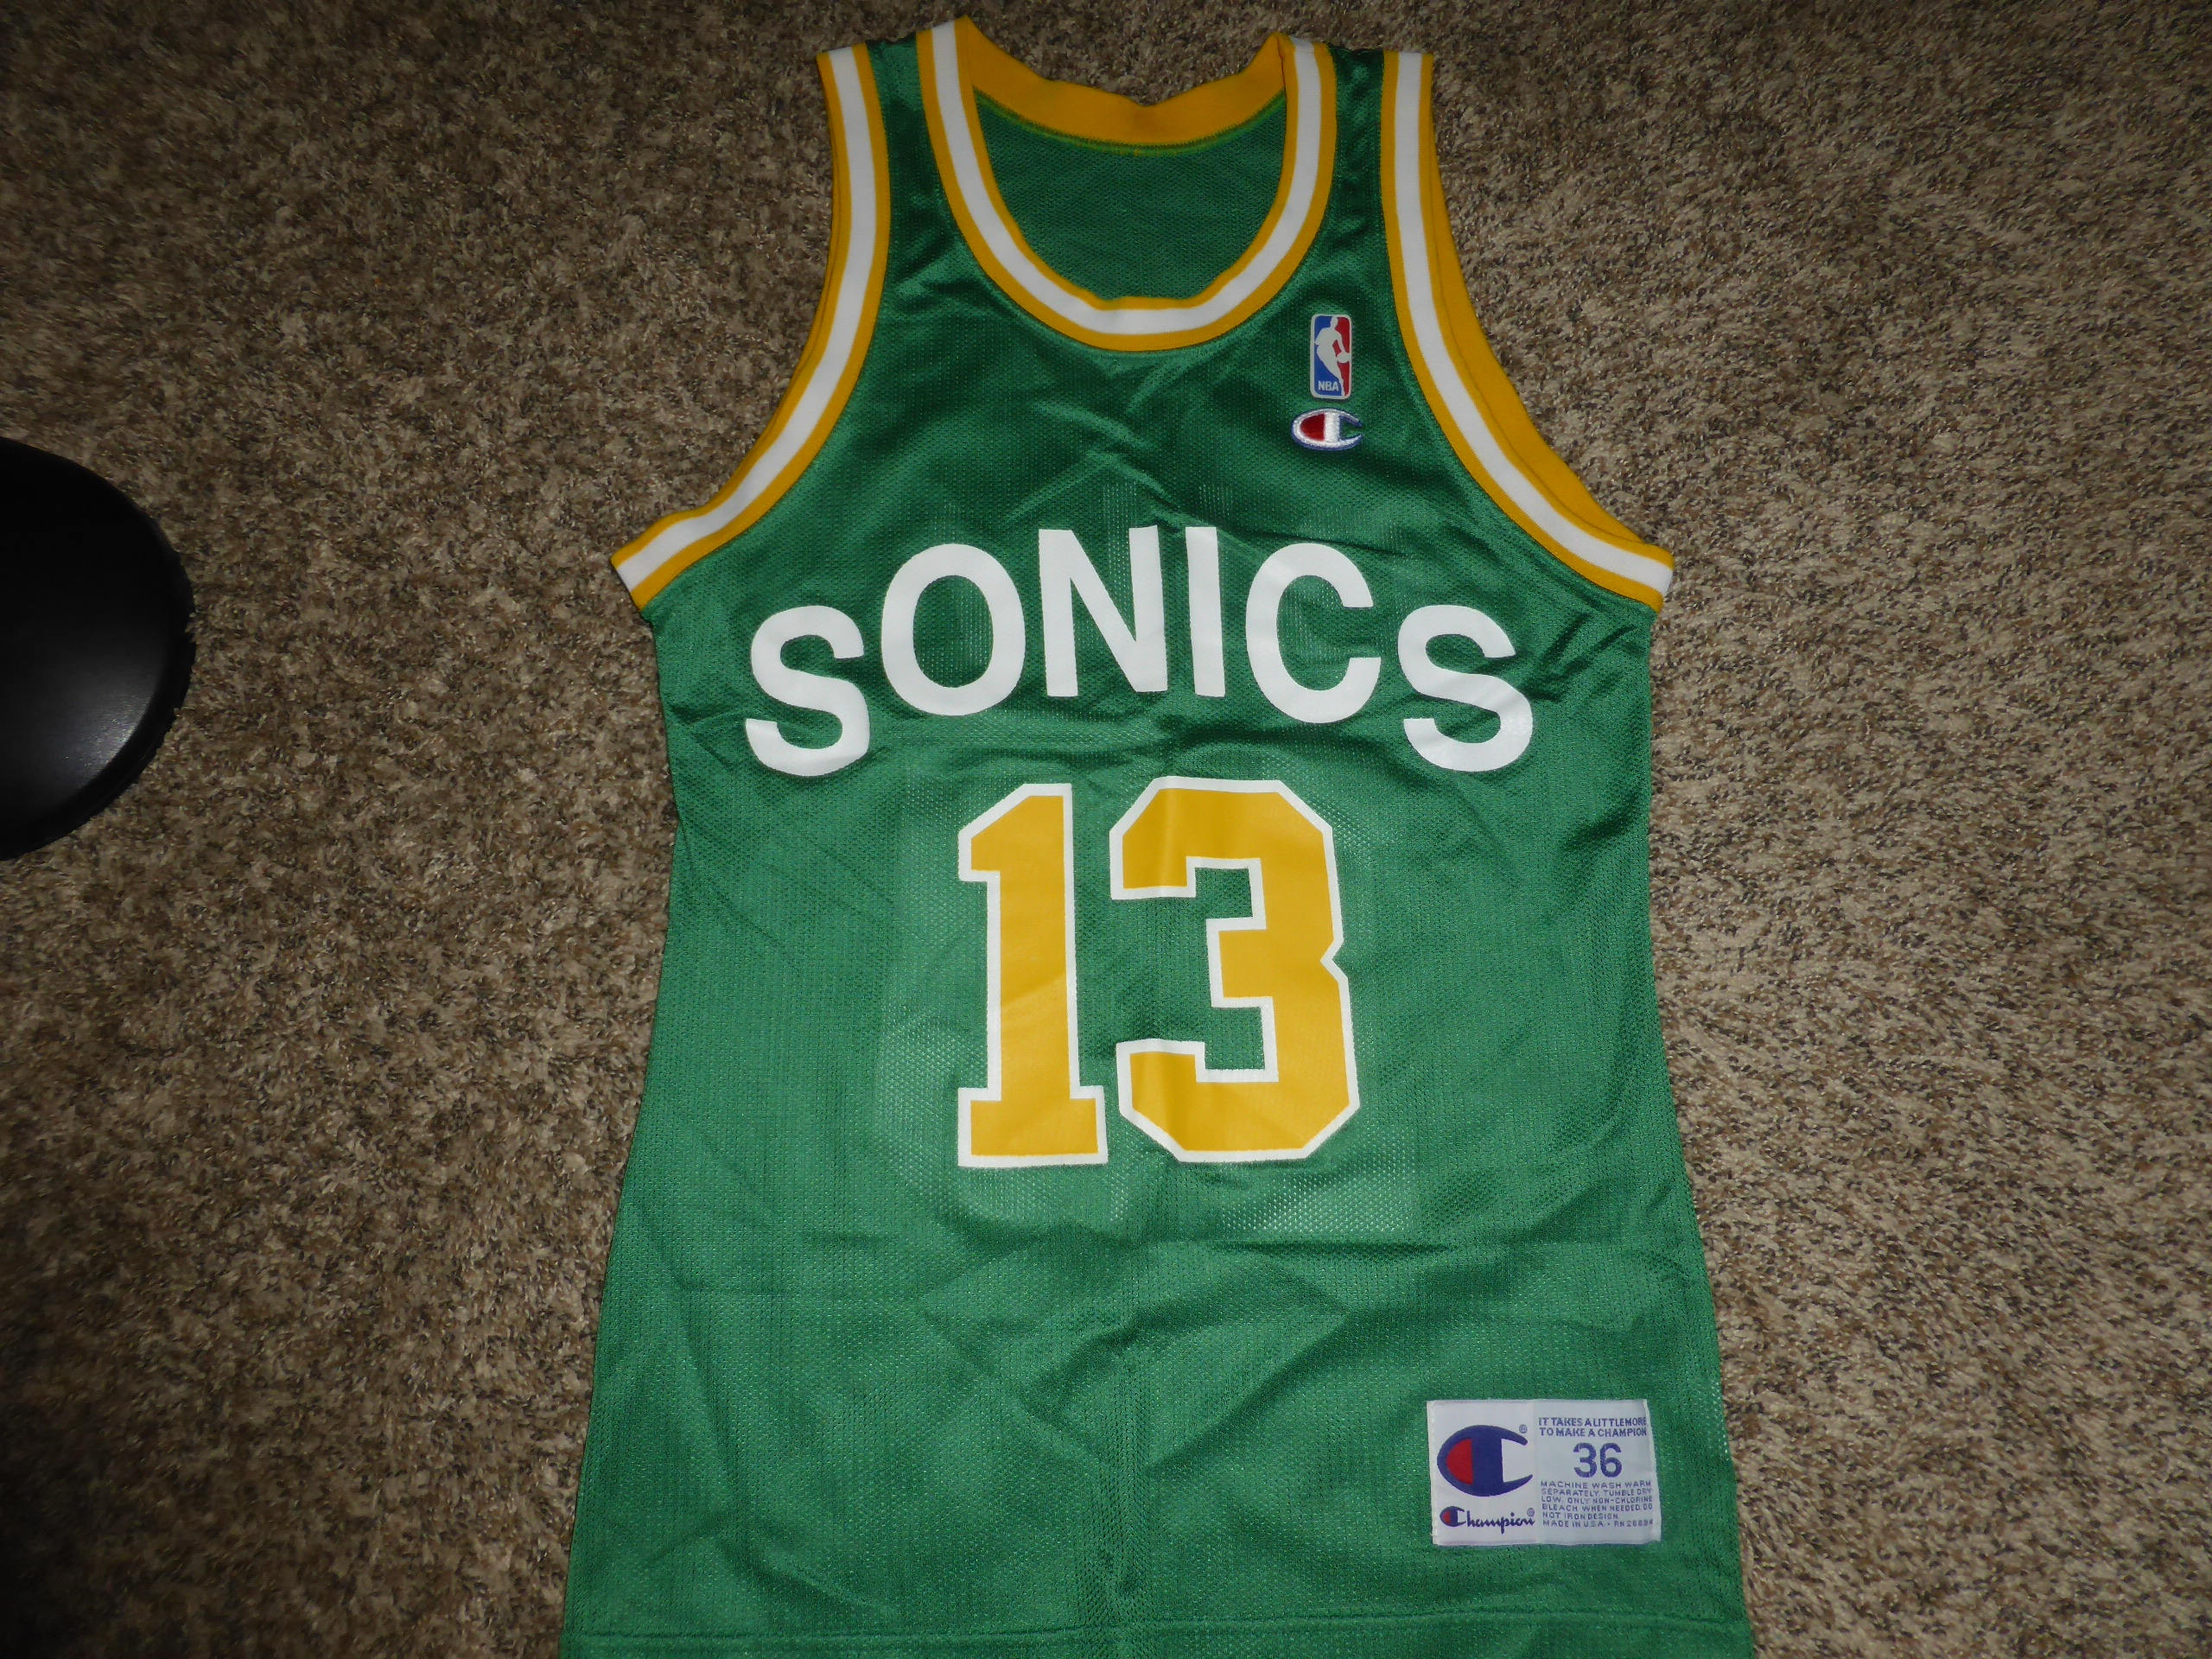 kendall gill jersey